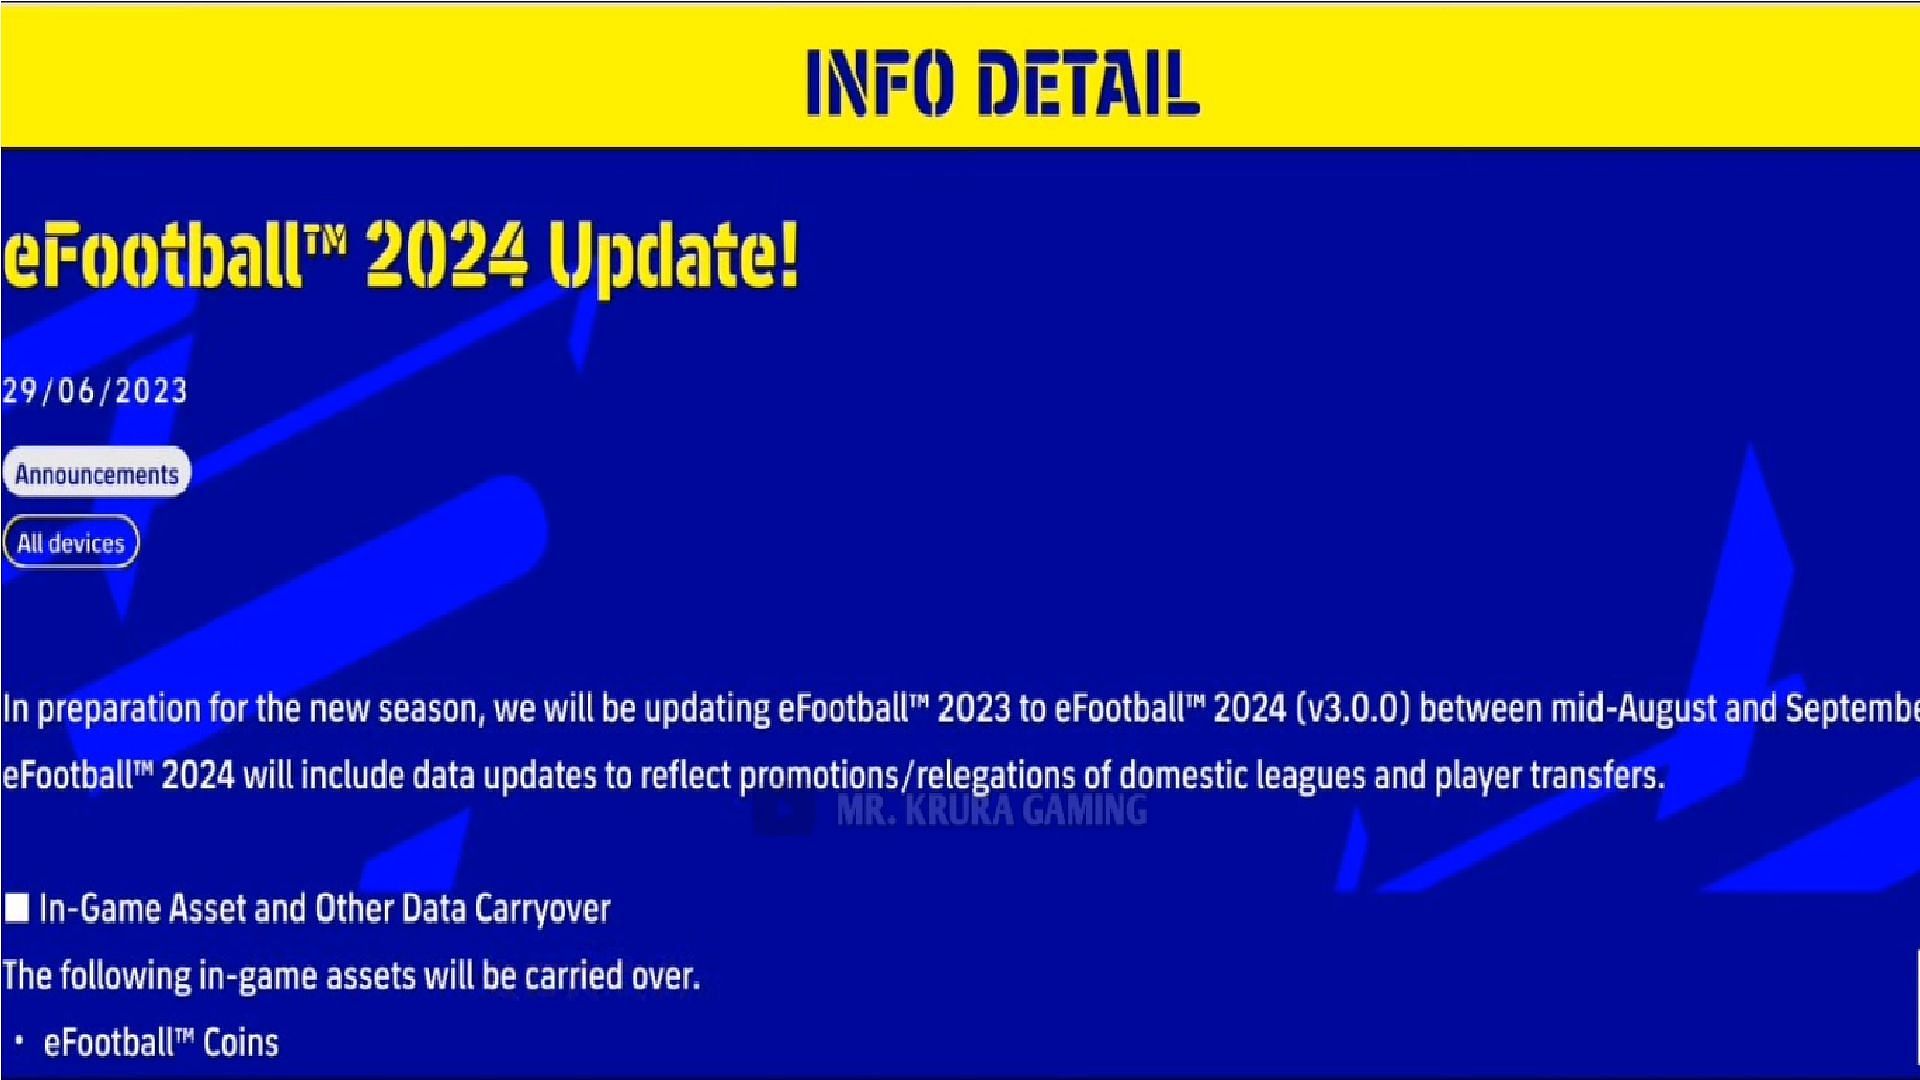 eFootball 2023 Mobile v3.0.0 update The expected release date of